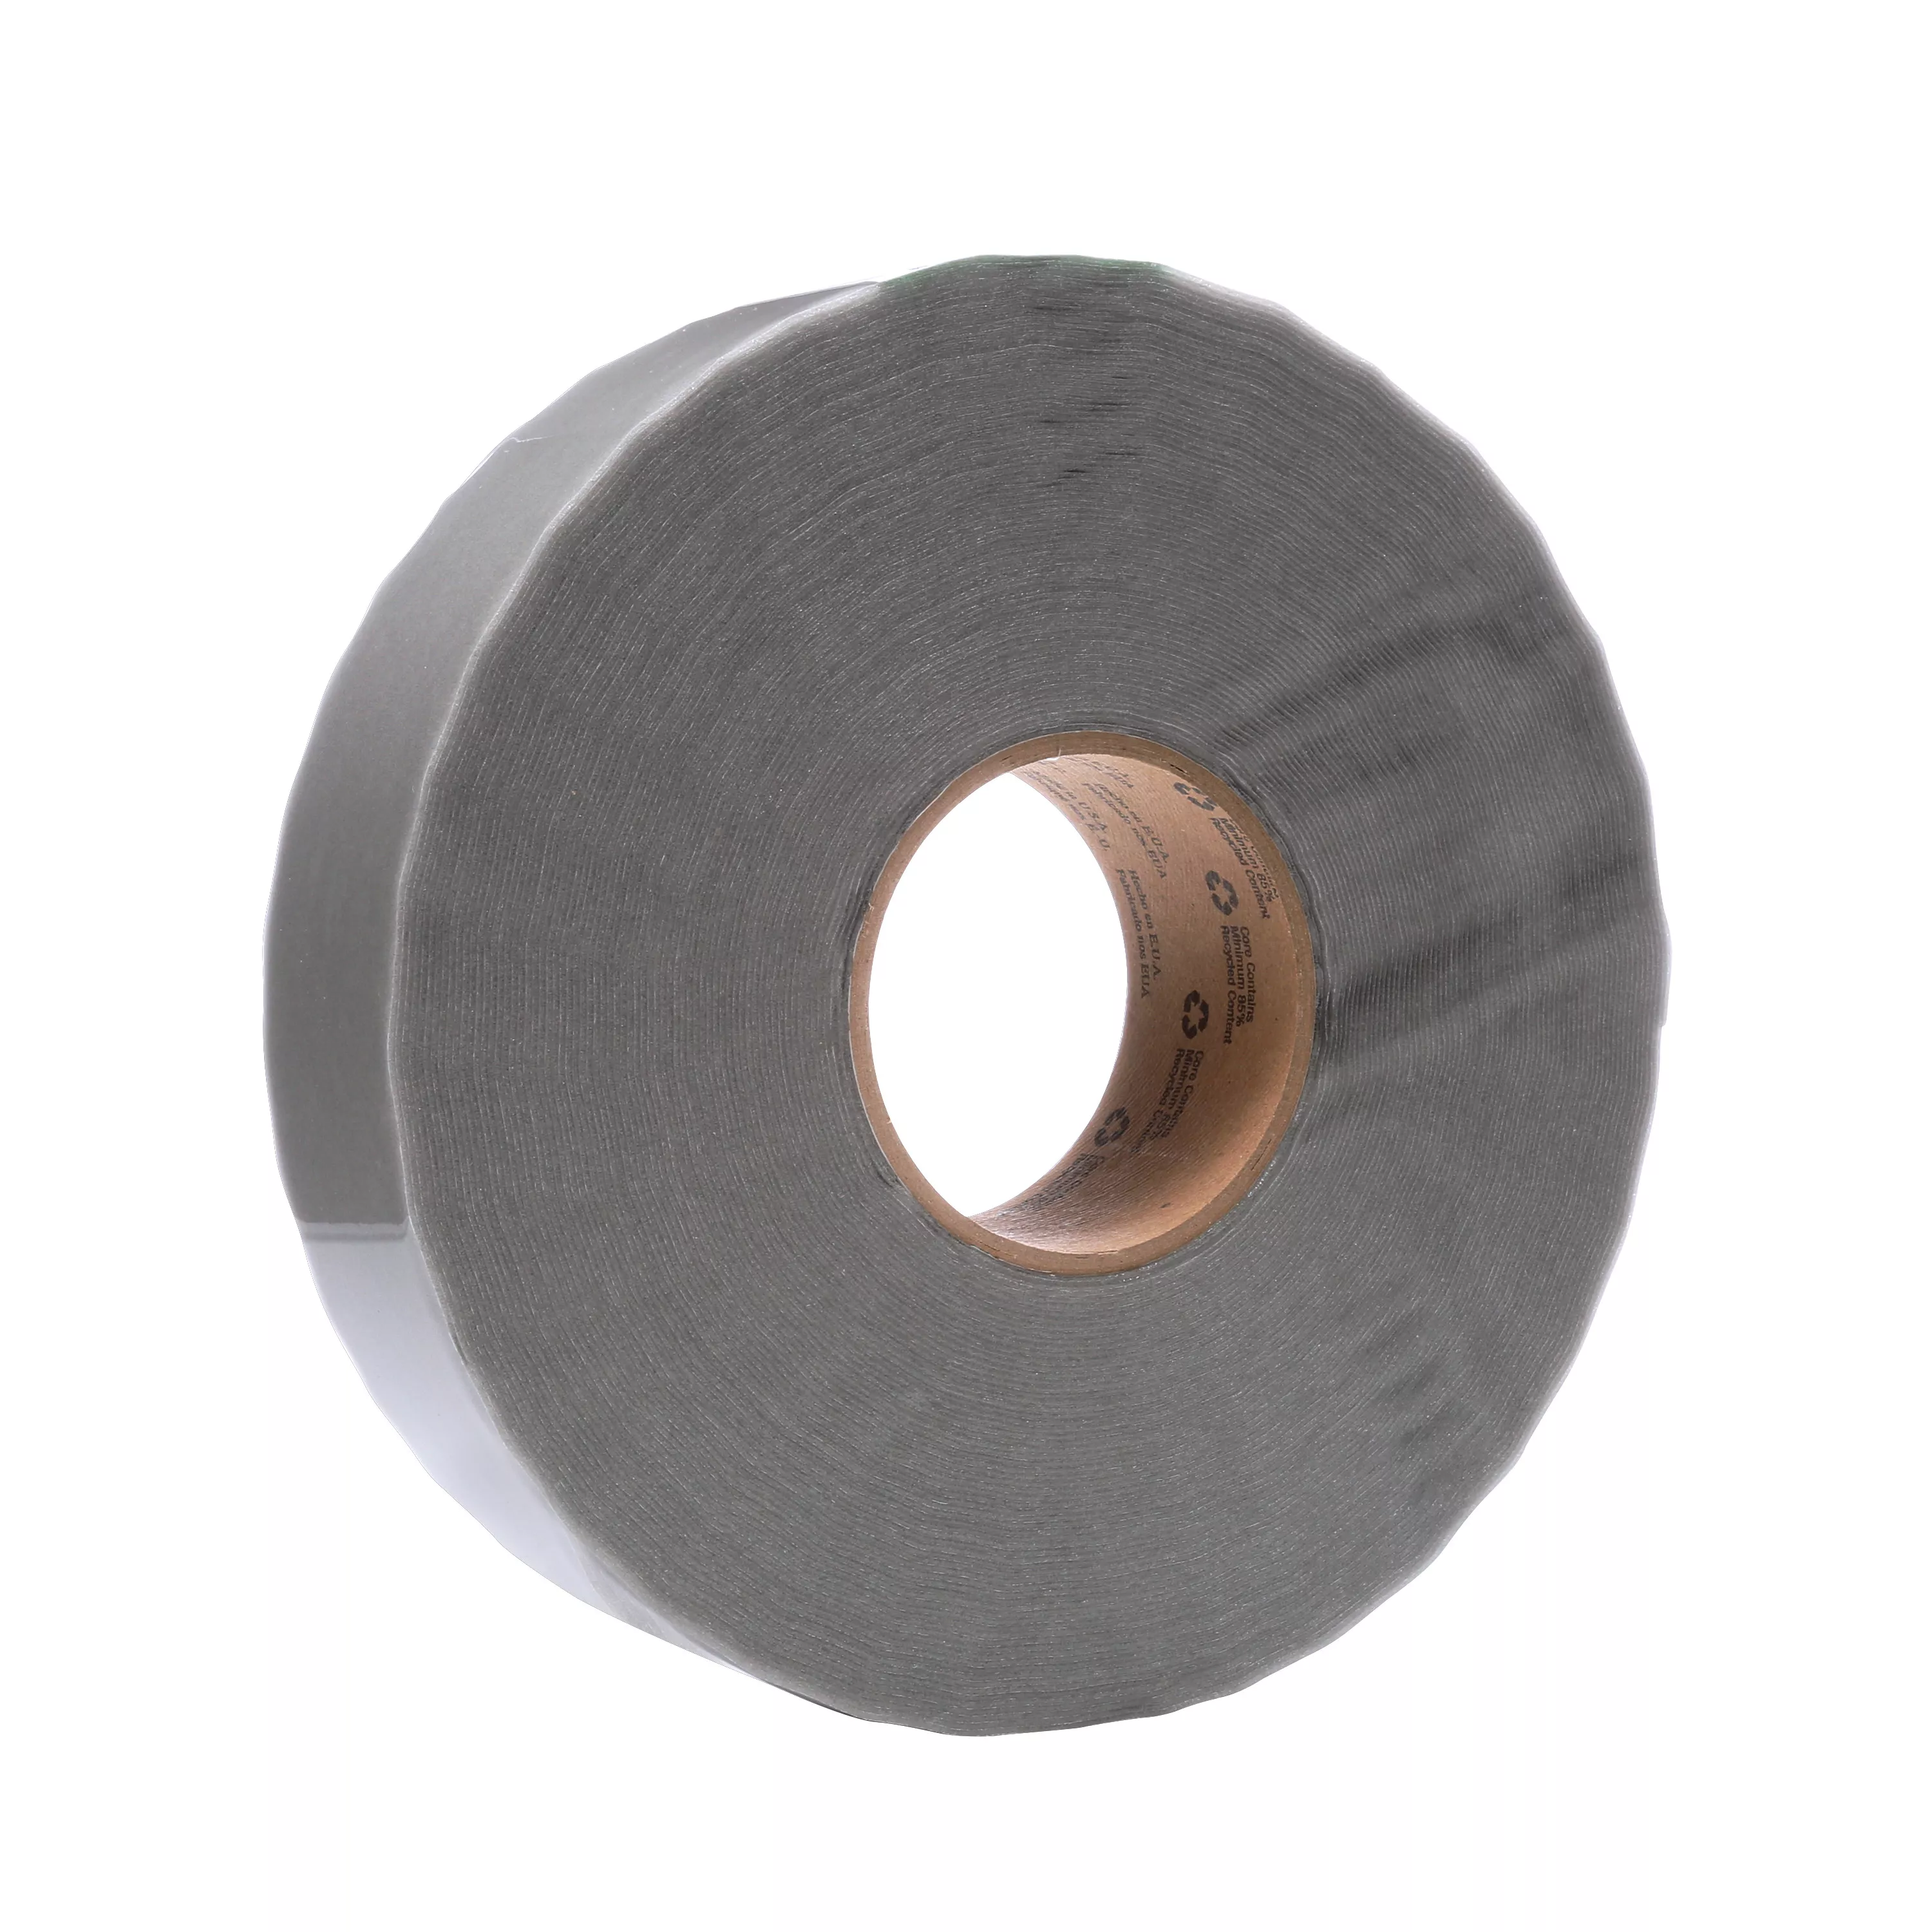 3M™ Extreme Sealing Tape 4411G, Gray, 1 in x 36 yd, 40 mil, 9 Roll/Case